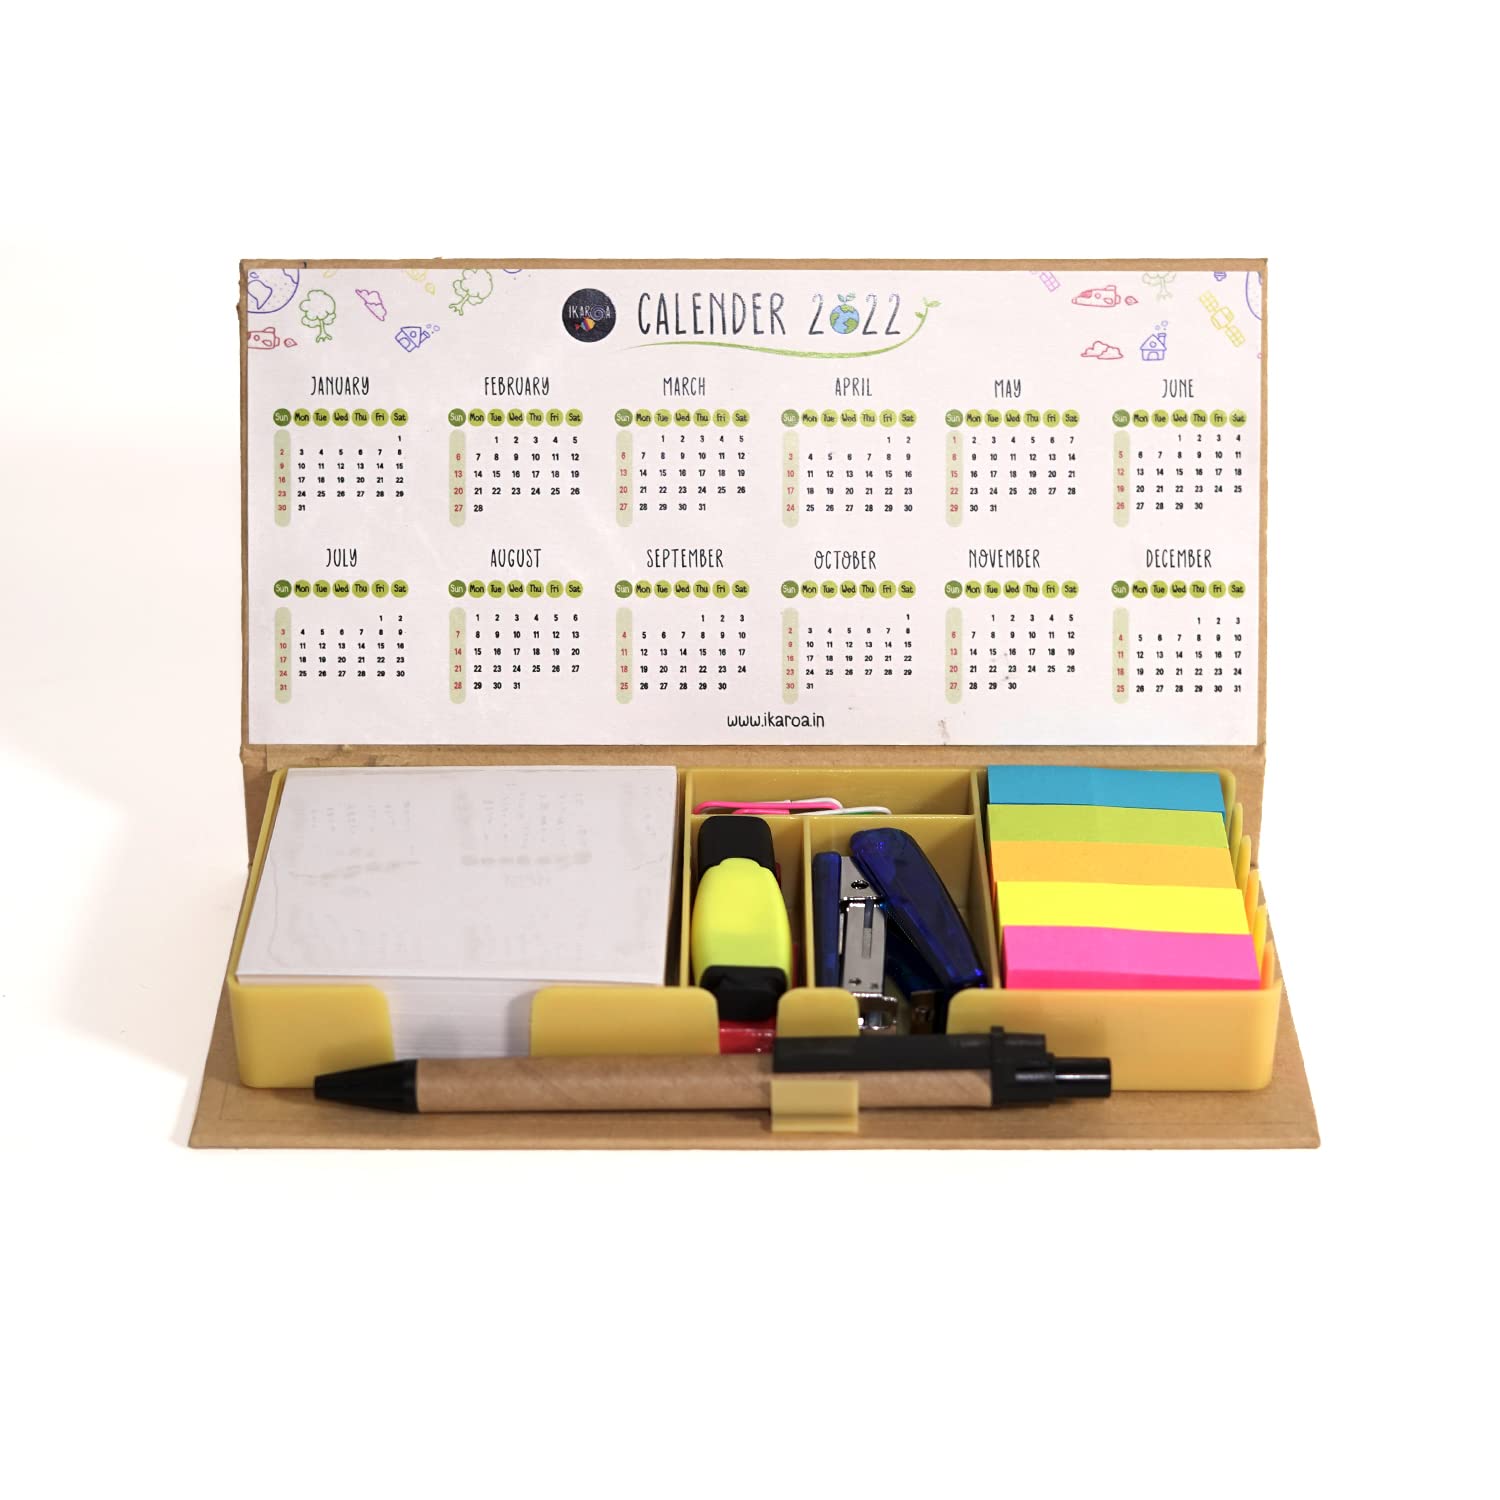 Stationary Box with Sticky notes pad /Memo Book, Calendar, highlighter, eraser, stapler, Sticky Notes & paper Clip Holder with Pen for Gifting